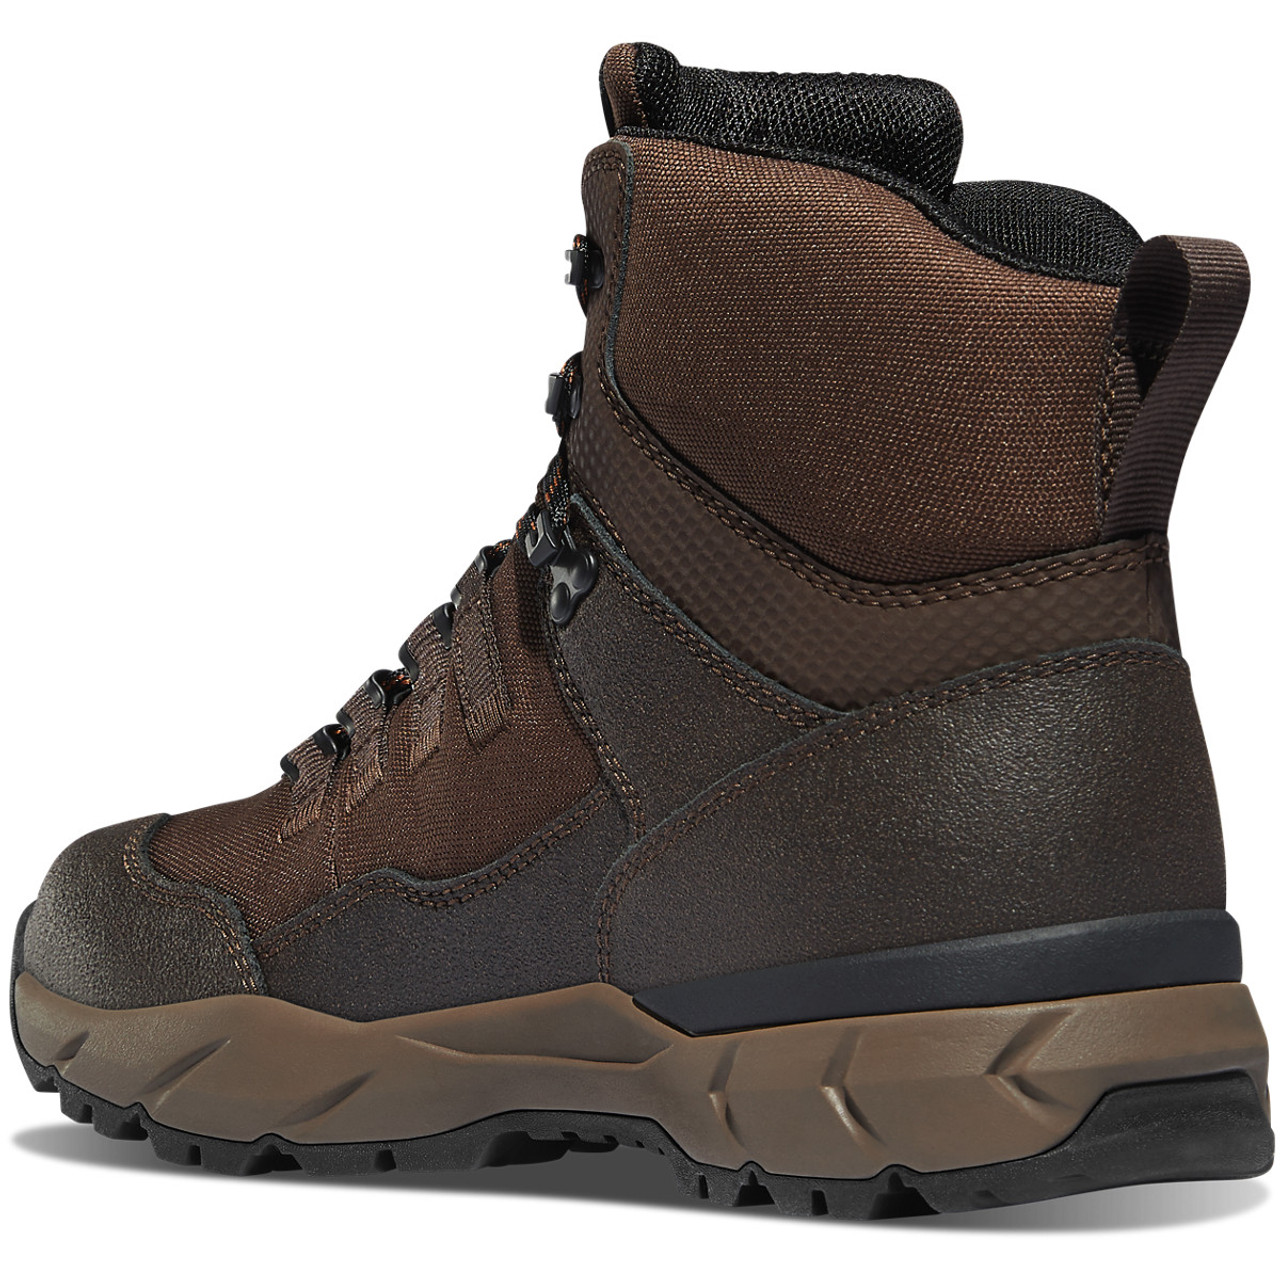 DANNER® VITAL TRAIL 5" COFFEE BROWN OUTDOOR BOOTS 65300